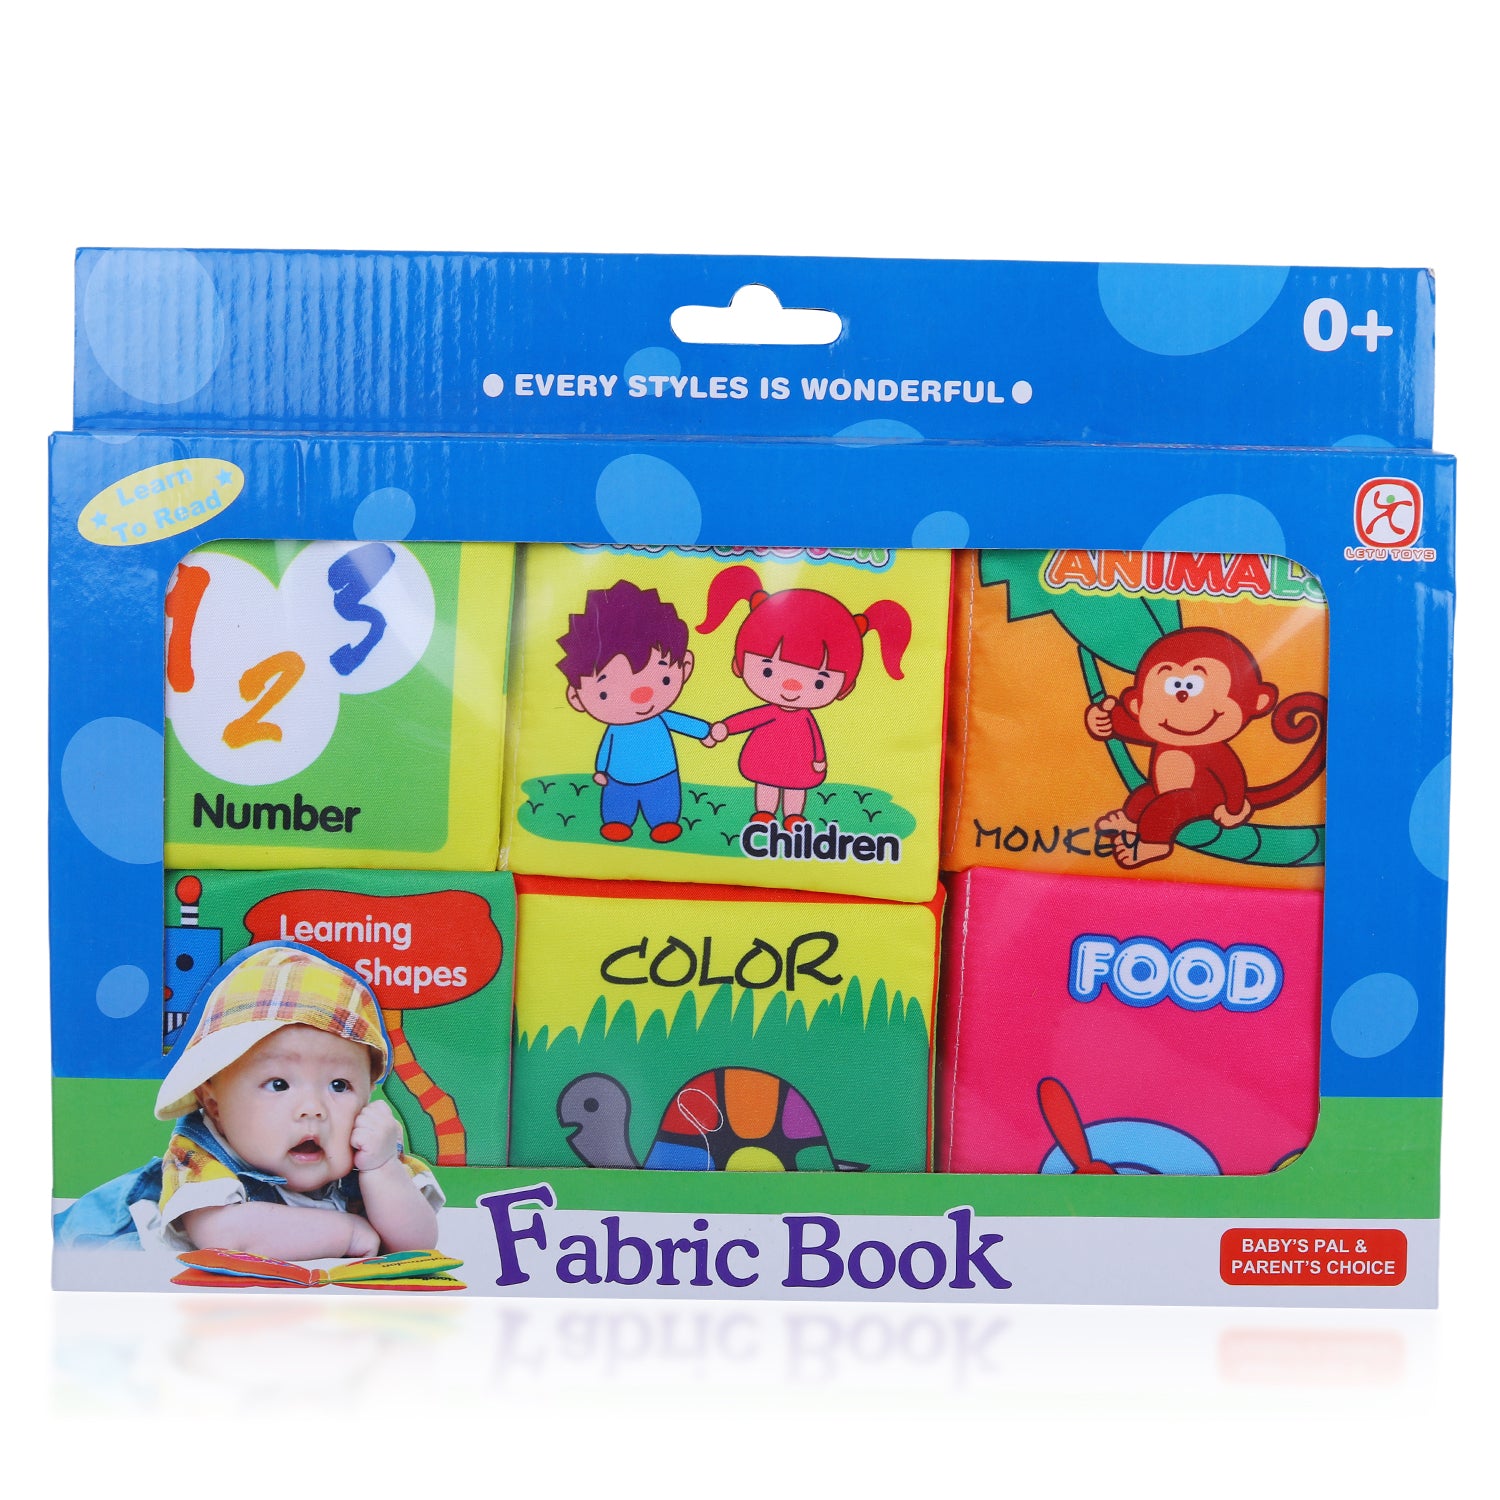 Six　Cloth　Kids　Buy　Set　Book　for　Online　Educational　of